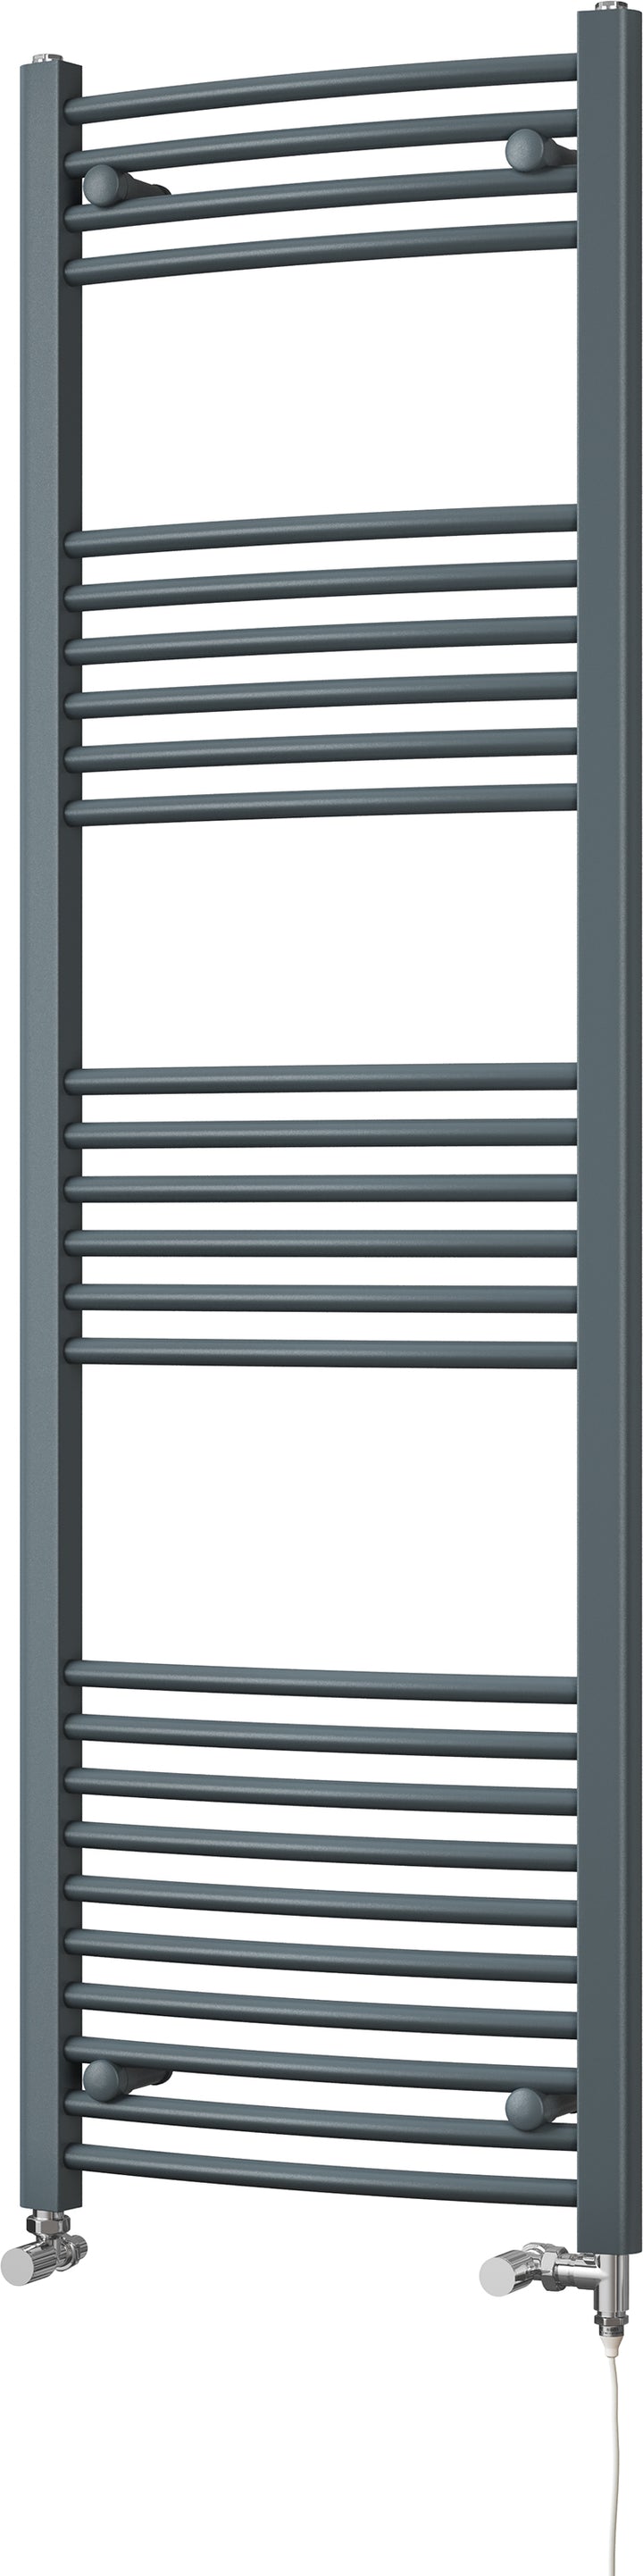 Zennor - Anthracite Dual Fuel Towel Rail  H1600mm x W500mm Standard - Curved